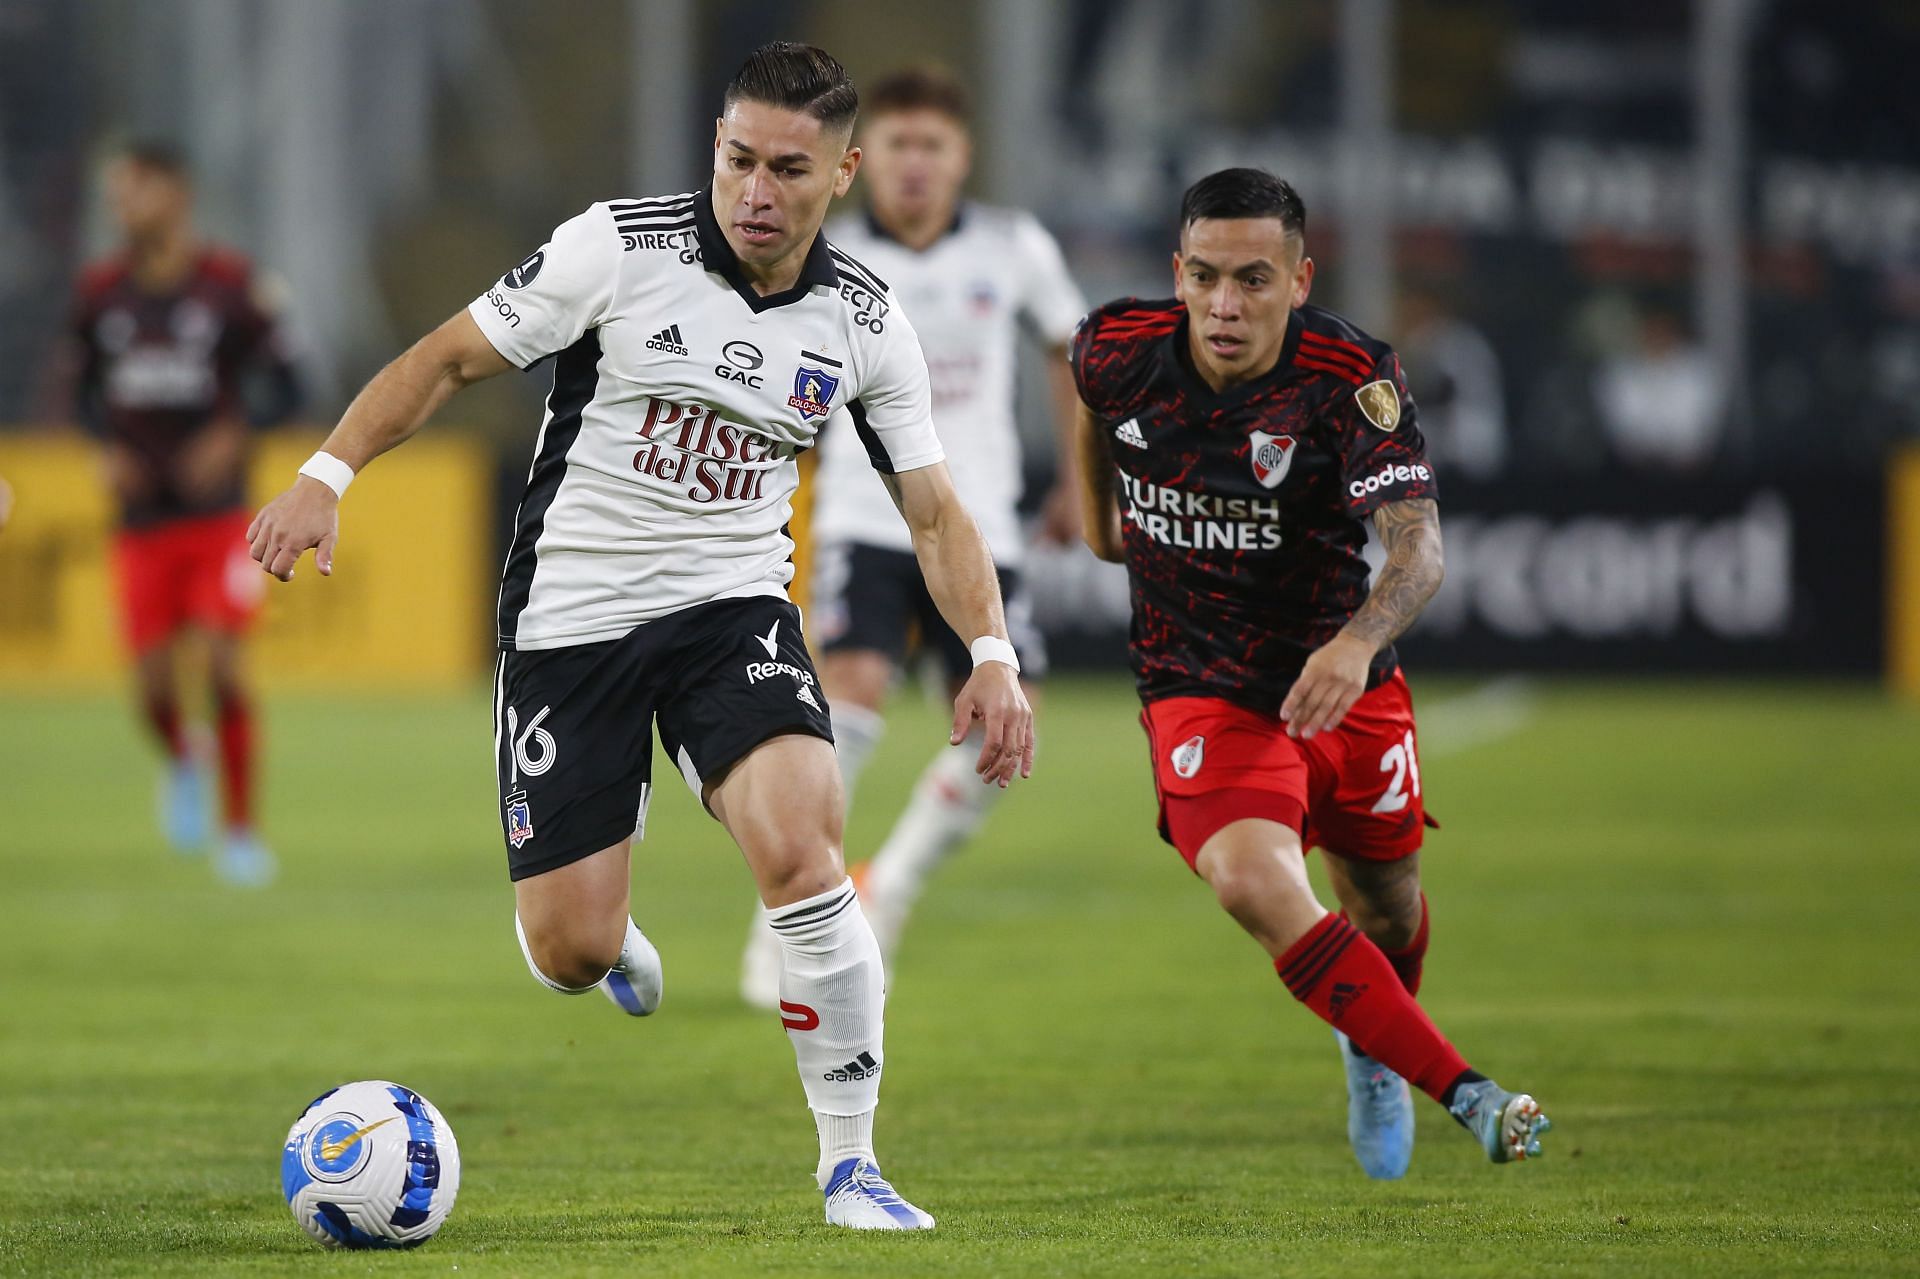 Colo Colo will look to bounce back after losing to River Plate last week.